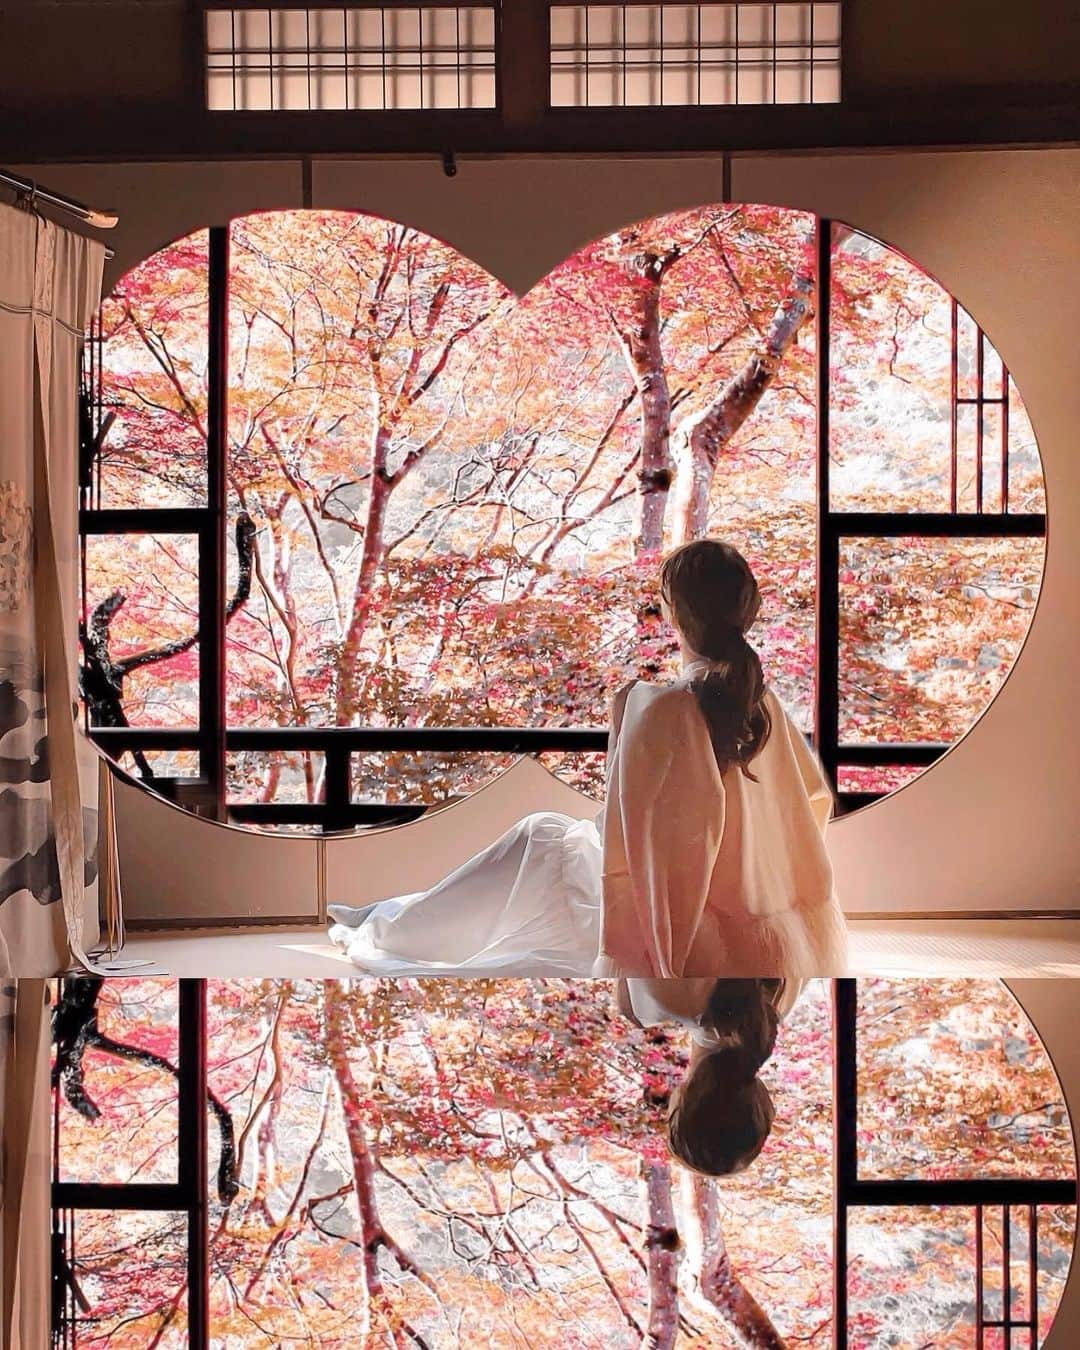 Yukicoさんのインスタグラム写真 - (YukicoInstagram)「‥  @yukicolifecom 🍂  四季折々の風情が愉しめる 絶景スポット「嵐山祐斎亭」 完全予約制です🤳🏻  ⚠️Reservations are required for tours. Reservations can be made from the official website.  "Arashiyama Yusai-tei" is a 150-year-old Meiji period building located at the site of Kameyamadono, the detached palace of Emperor Gosaga and Emperor Kameyama built about 800 years ago.  丸窓の部屋 連結している丸窓はとても珍しい形 お部屋もいくつかありますが 私的にはここがおすすめの場所です📷  It is very unusual for a round window to be connected."As a shooting spot, this room is full of energy."  @yukicolifecom  ——————————————————— 𝐘𝐮𝐬𝐚𝐢-𝐭𝐞𝐢 𝐀𝐑𝐀𝐒𝐇𝐈𝐘𝐀𝐌𝐀 嵐山祐斎亭　@arashiyama_yusai  京都府京都市右京区嵯峨亀ノ尾町6 https://yusai.kyoto/yusaitei/ 京福嵐山駅より徒歩10分 JR嵯峨嵐山駅より徒歩20分 阪急嵐山駅より徒歩20分 京都駅よりタクシーにて30分 0歳〜12歳のお子様は入場できません  #kyototrip  #kyotojapan #arashiyama #yusai #yusaitei #嵐山観光 #祐斎亭 #嵐山祐斎亭」11月29日 18時04分 - yukicolifecom